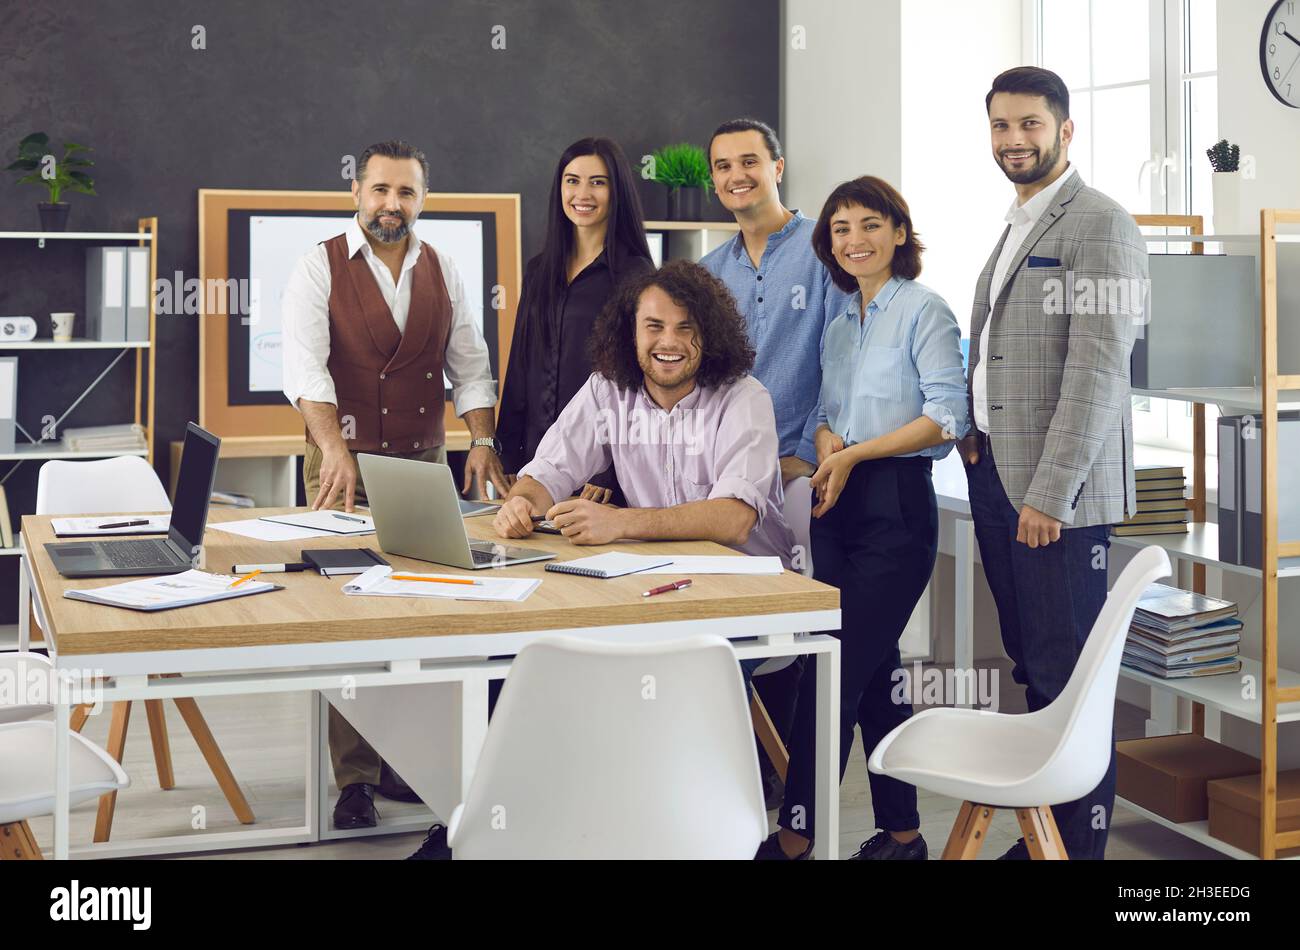 Portrait of team of happy creative business professionals during meeting in office Stock Photo